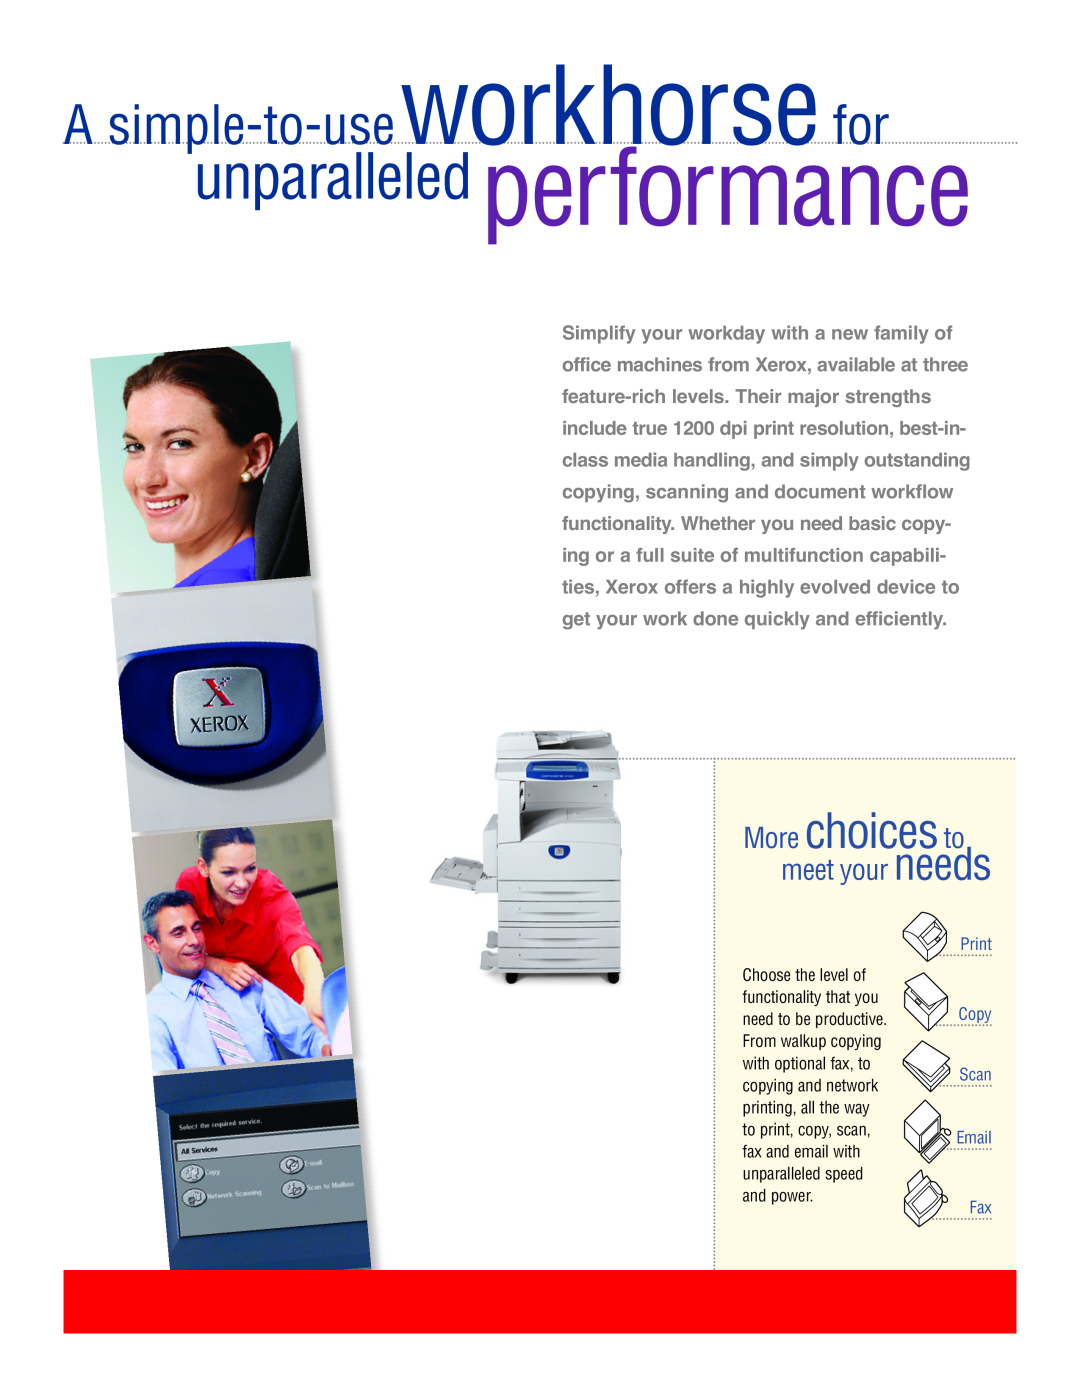 Xerox 133 manual unparalleled performance, A simple-to-useworkhorse for, More choices to, meet your needs 